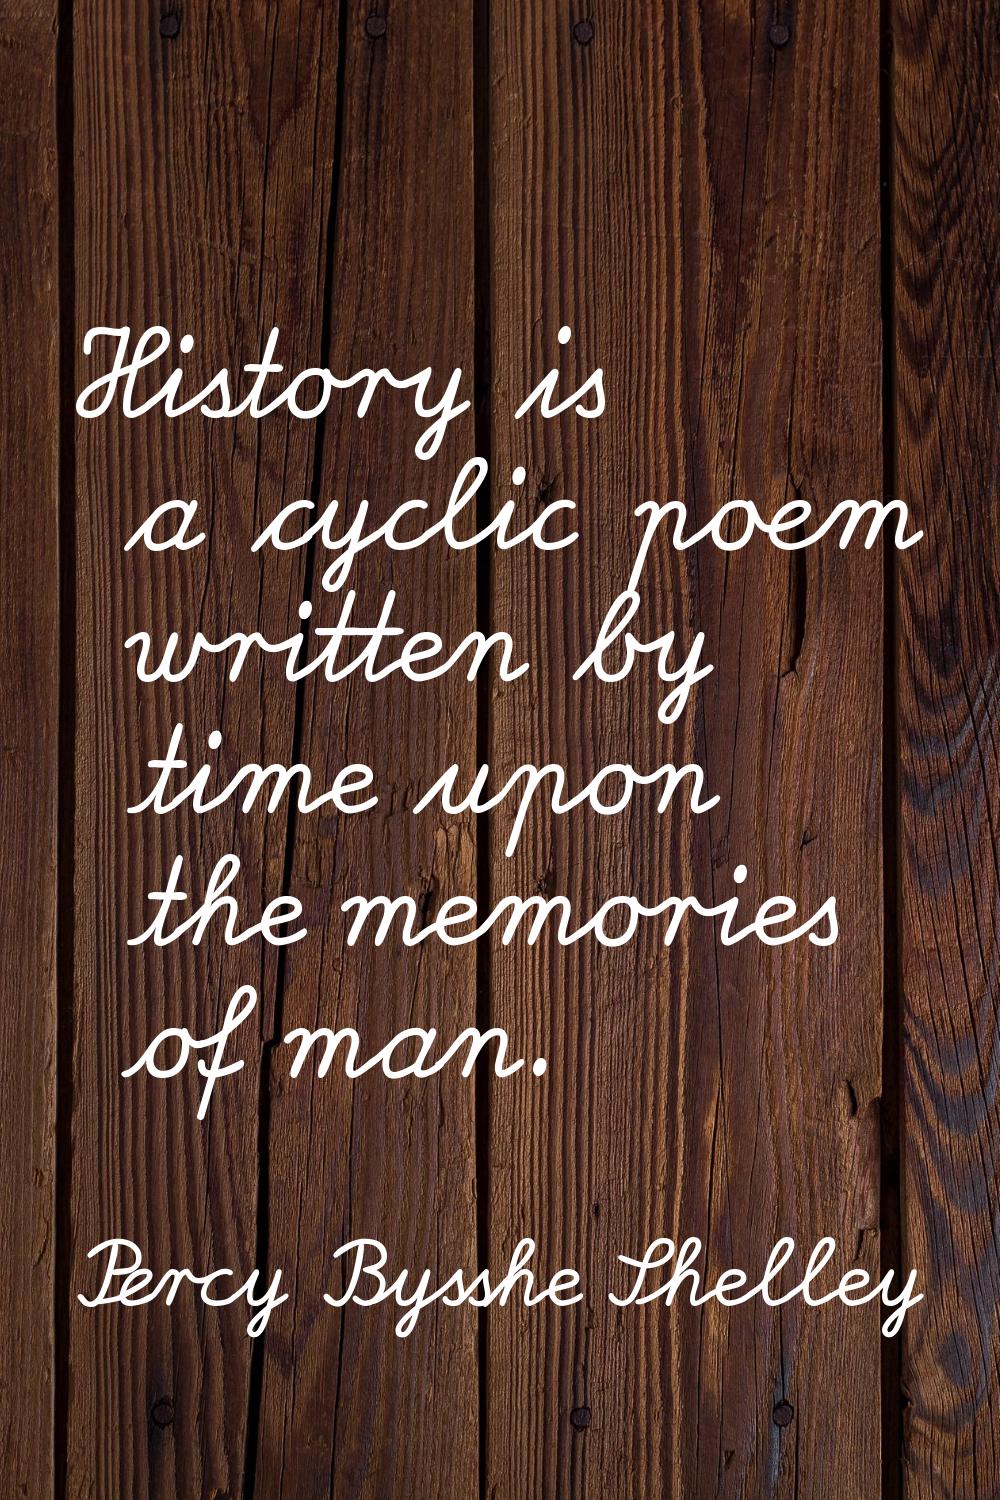 History is a cyclic poem written by time upon the memories of man.